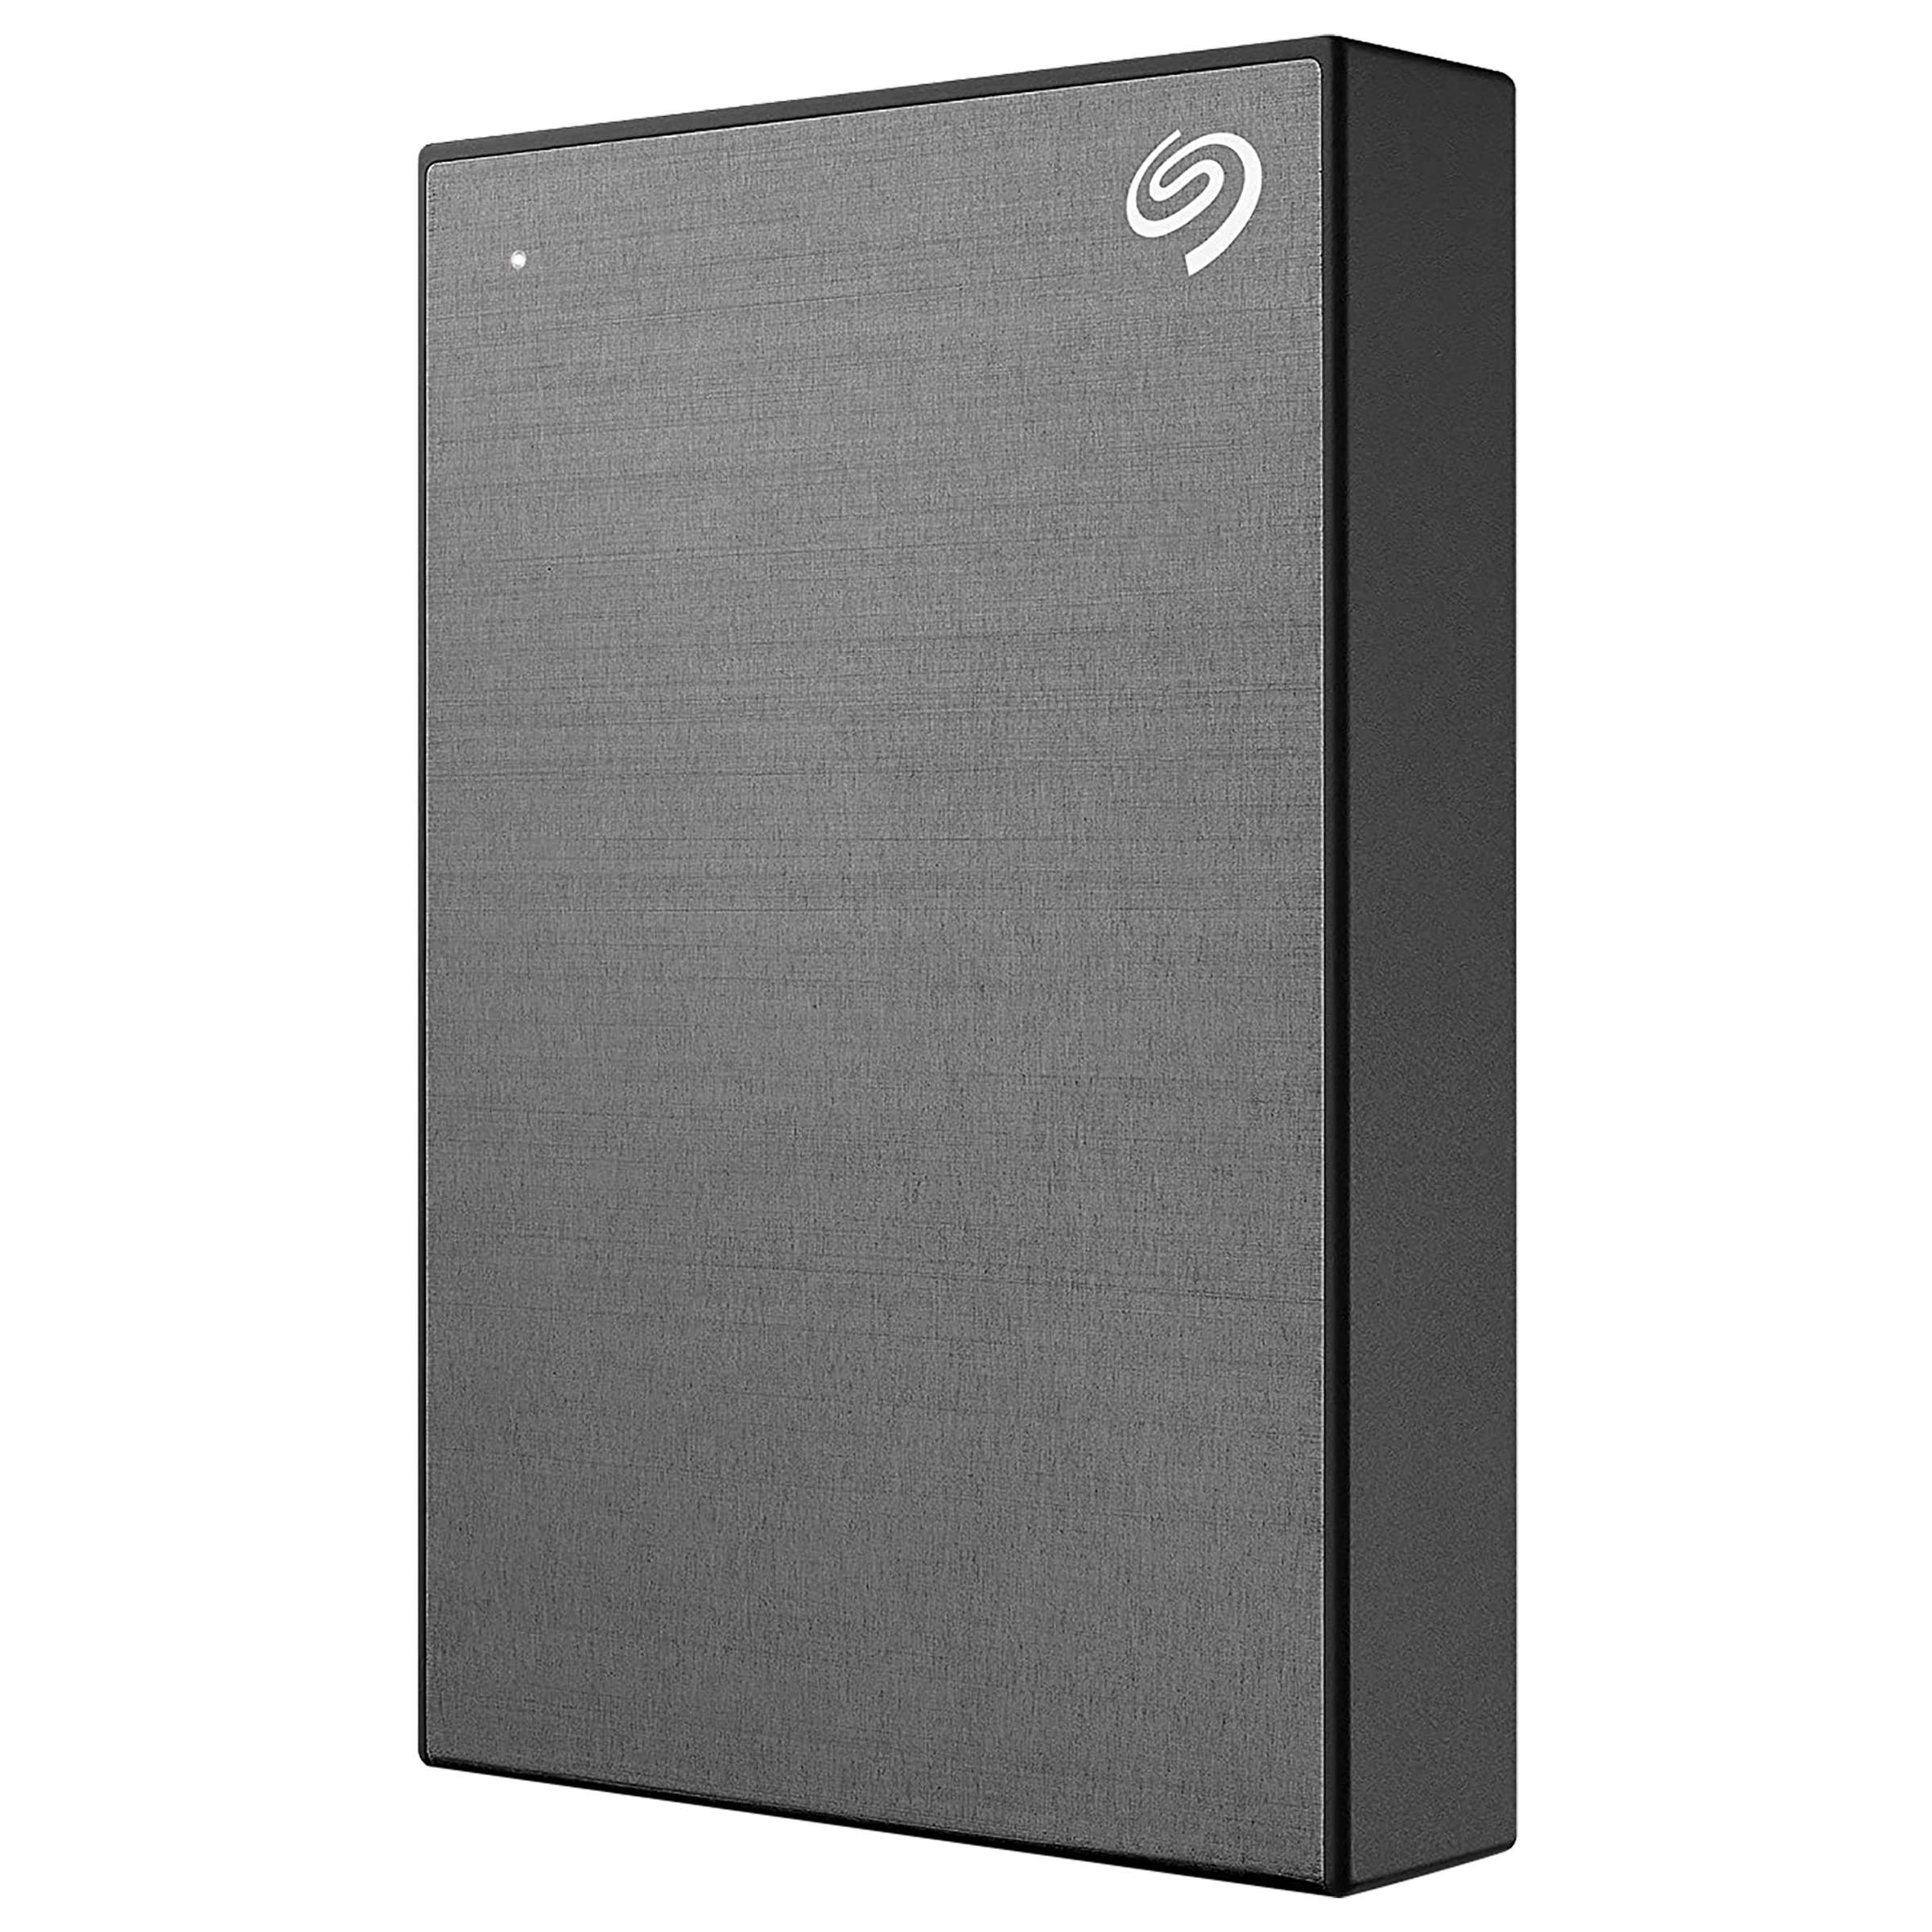 Seagate One Touch 5TB USB 3.0 Hard Disk Drive (Password Activated Hardware Encryption, STKZ5000404, Grey)